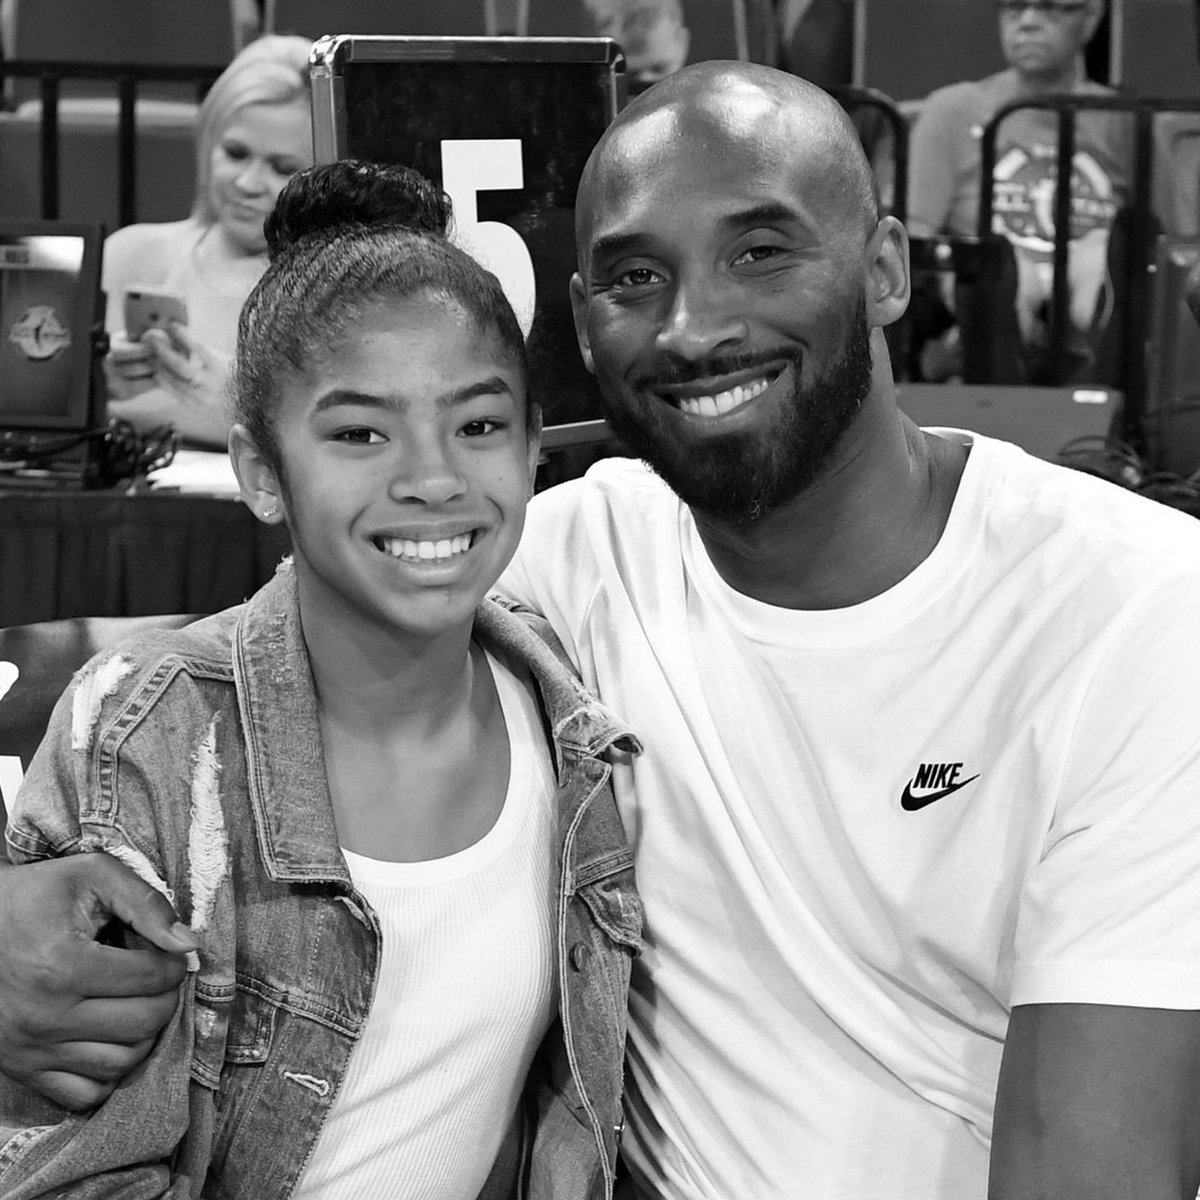 2 years ago today, the world lost Kobe and Gianna Bryant. Rest in peace. 🙏🏻